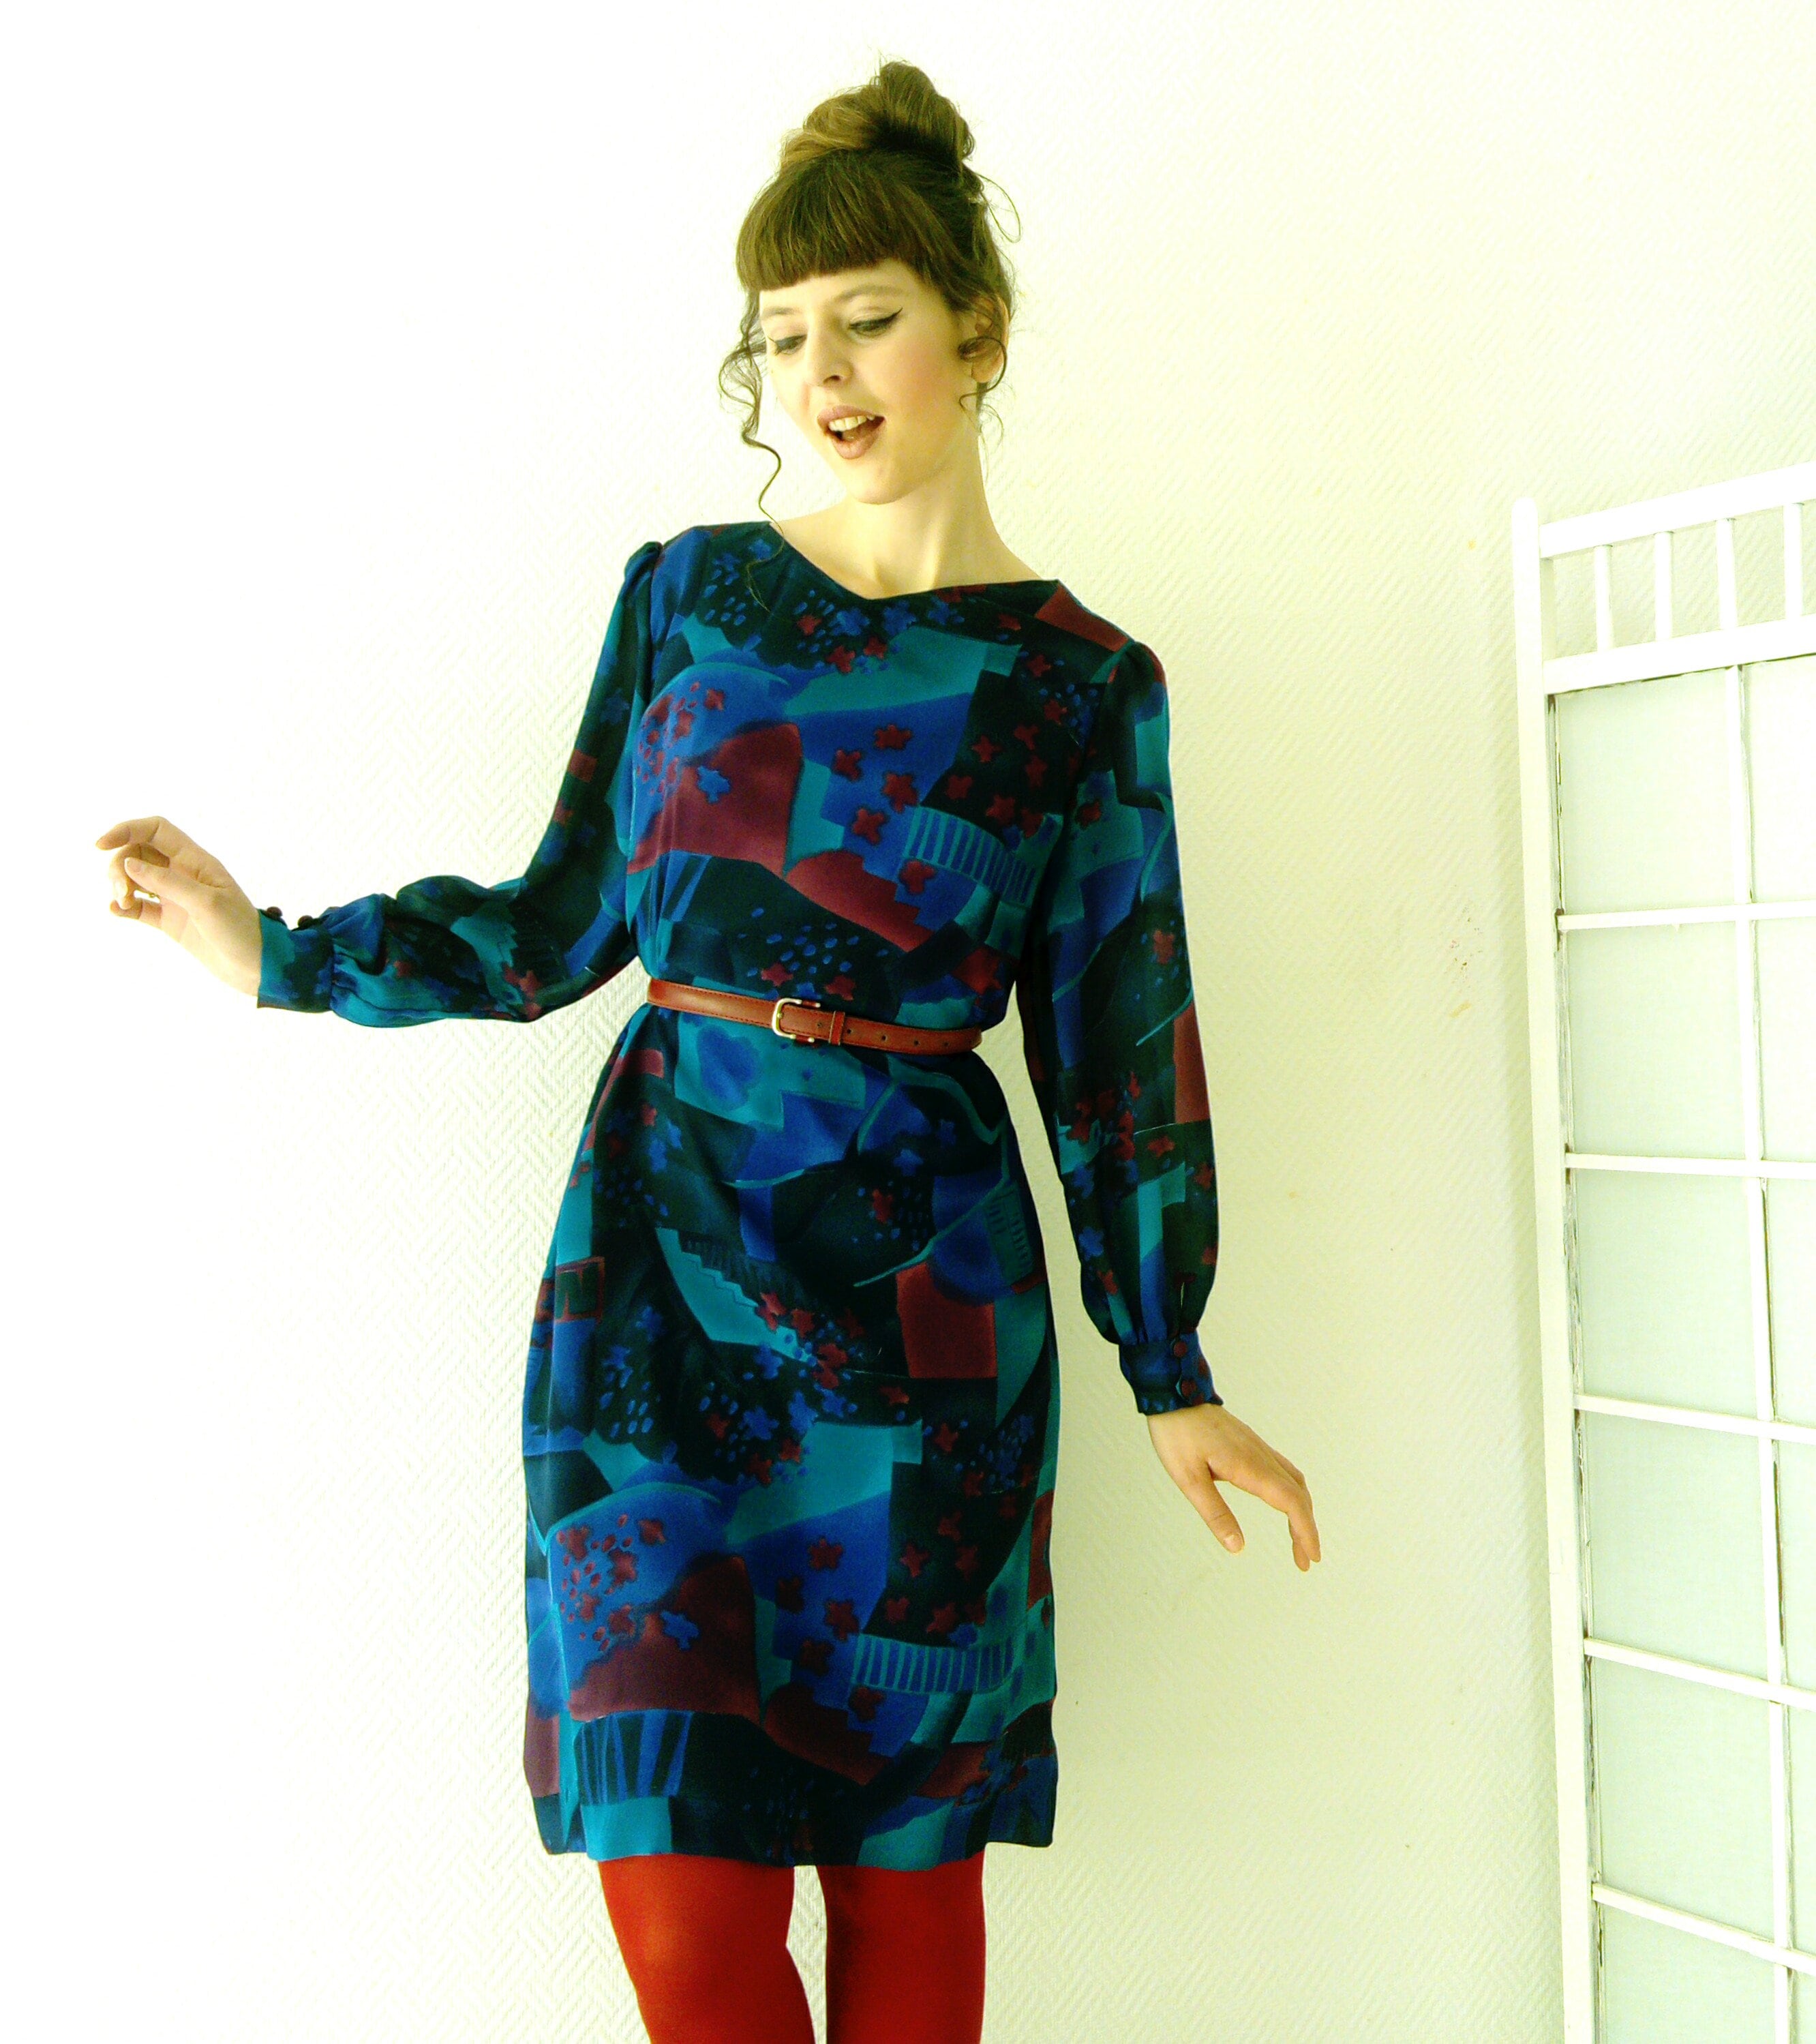 Blue psychedelic dress 70s style's / 70's style blue plsychedelic dress